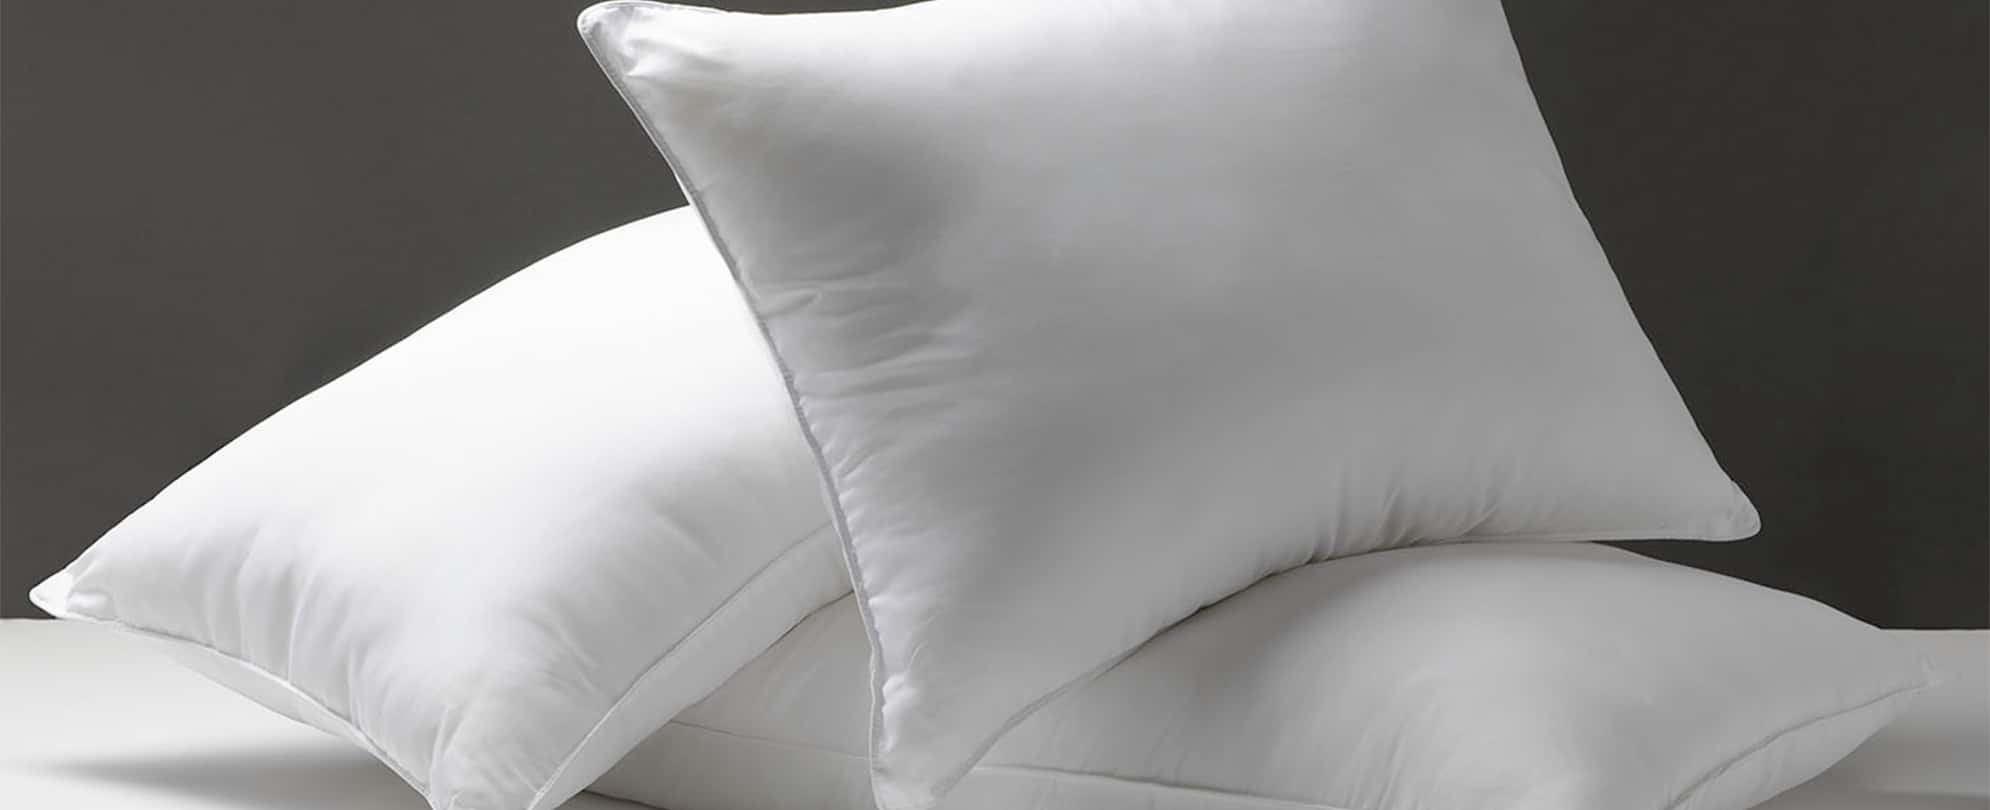 wyndham at home pillows